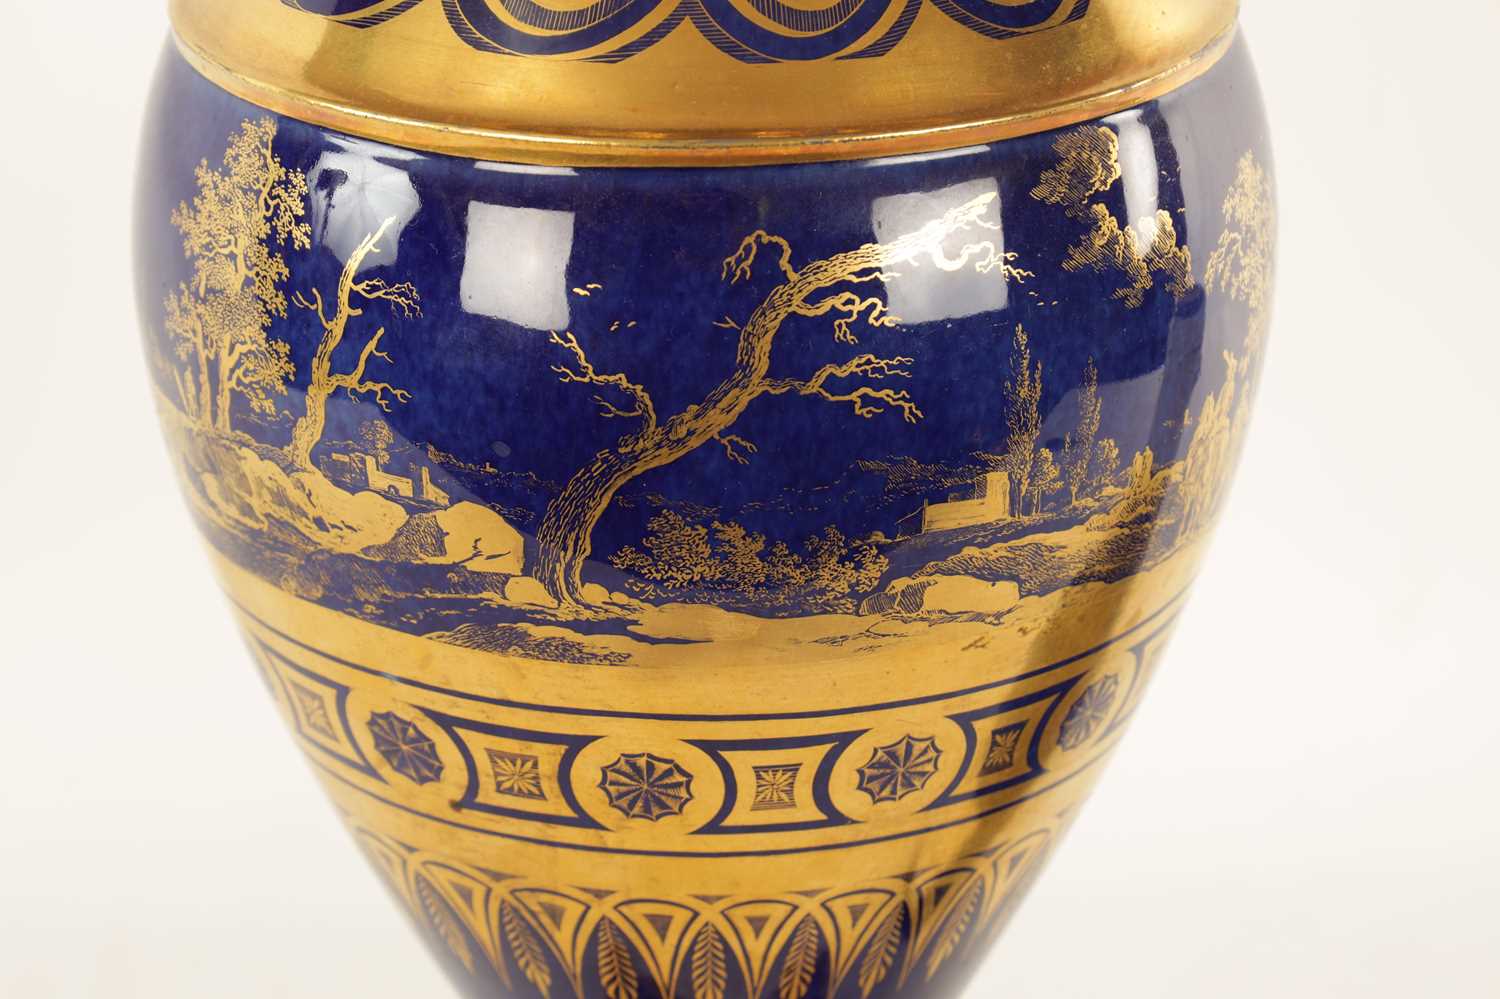 AN EARLY 19TH CENTURY FRENCH PARIS PORCELAIN ROYAL BLUE AND GILT URN SHAPED PEDESTAL VASE - Image 3 of 8